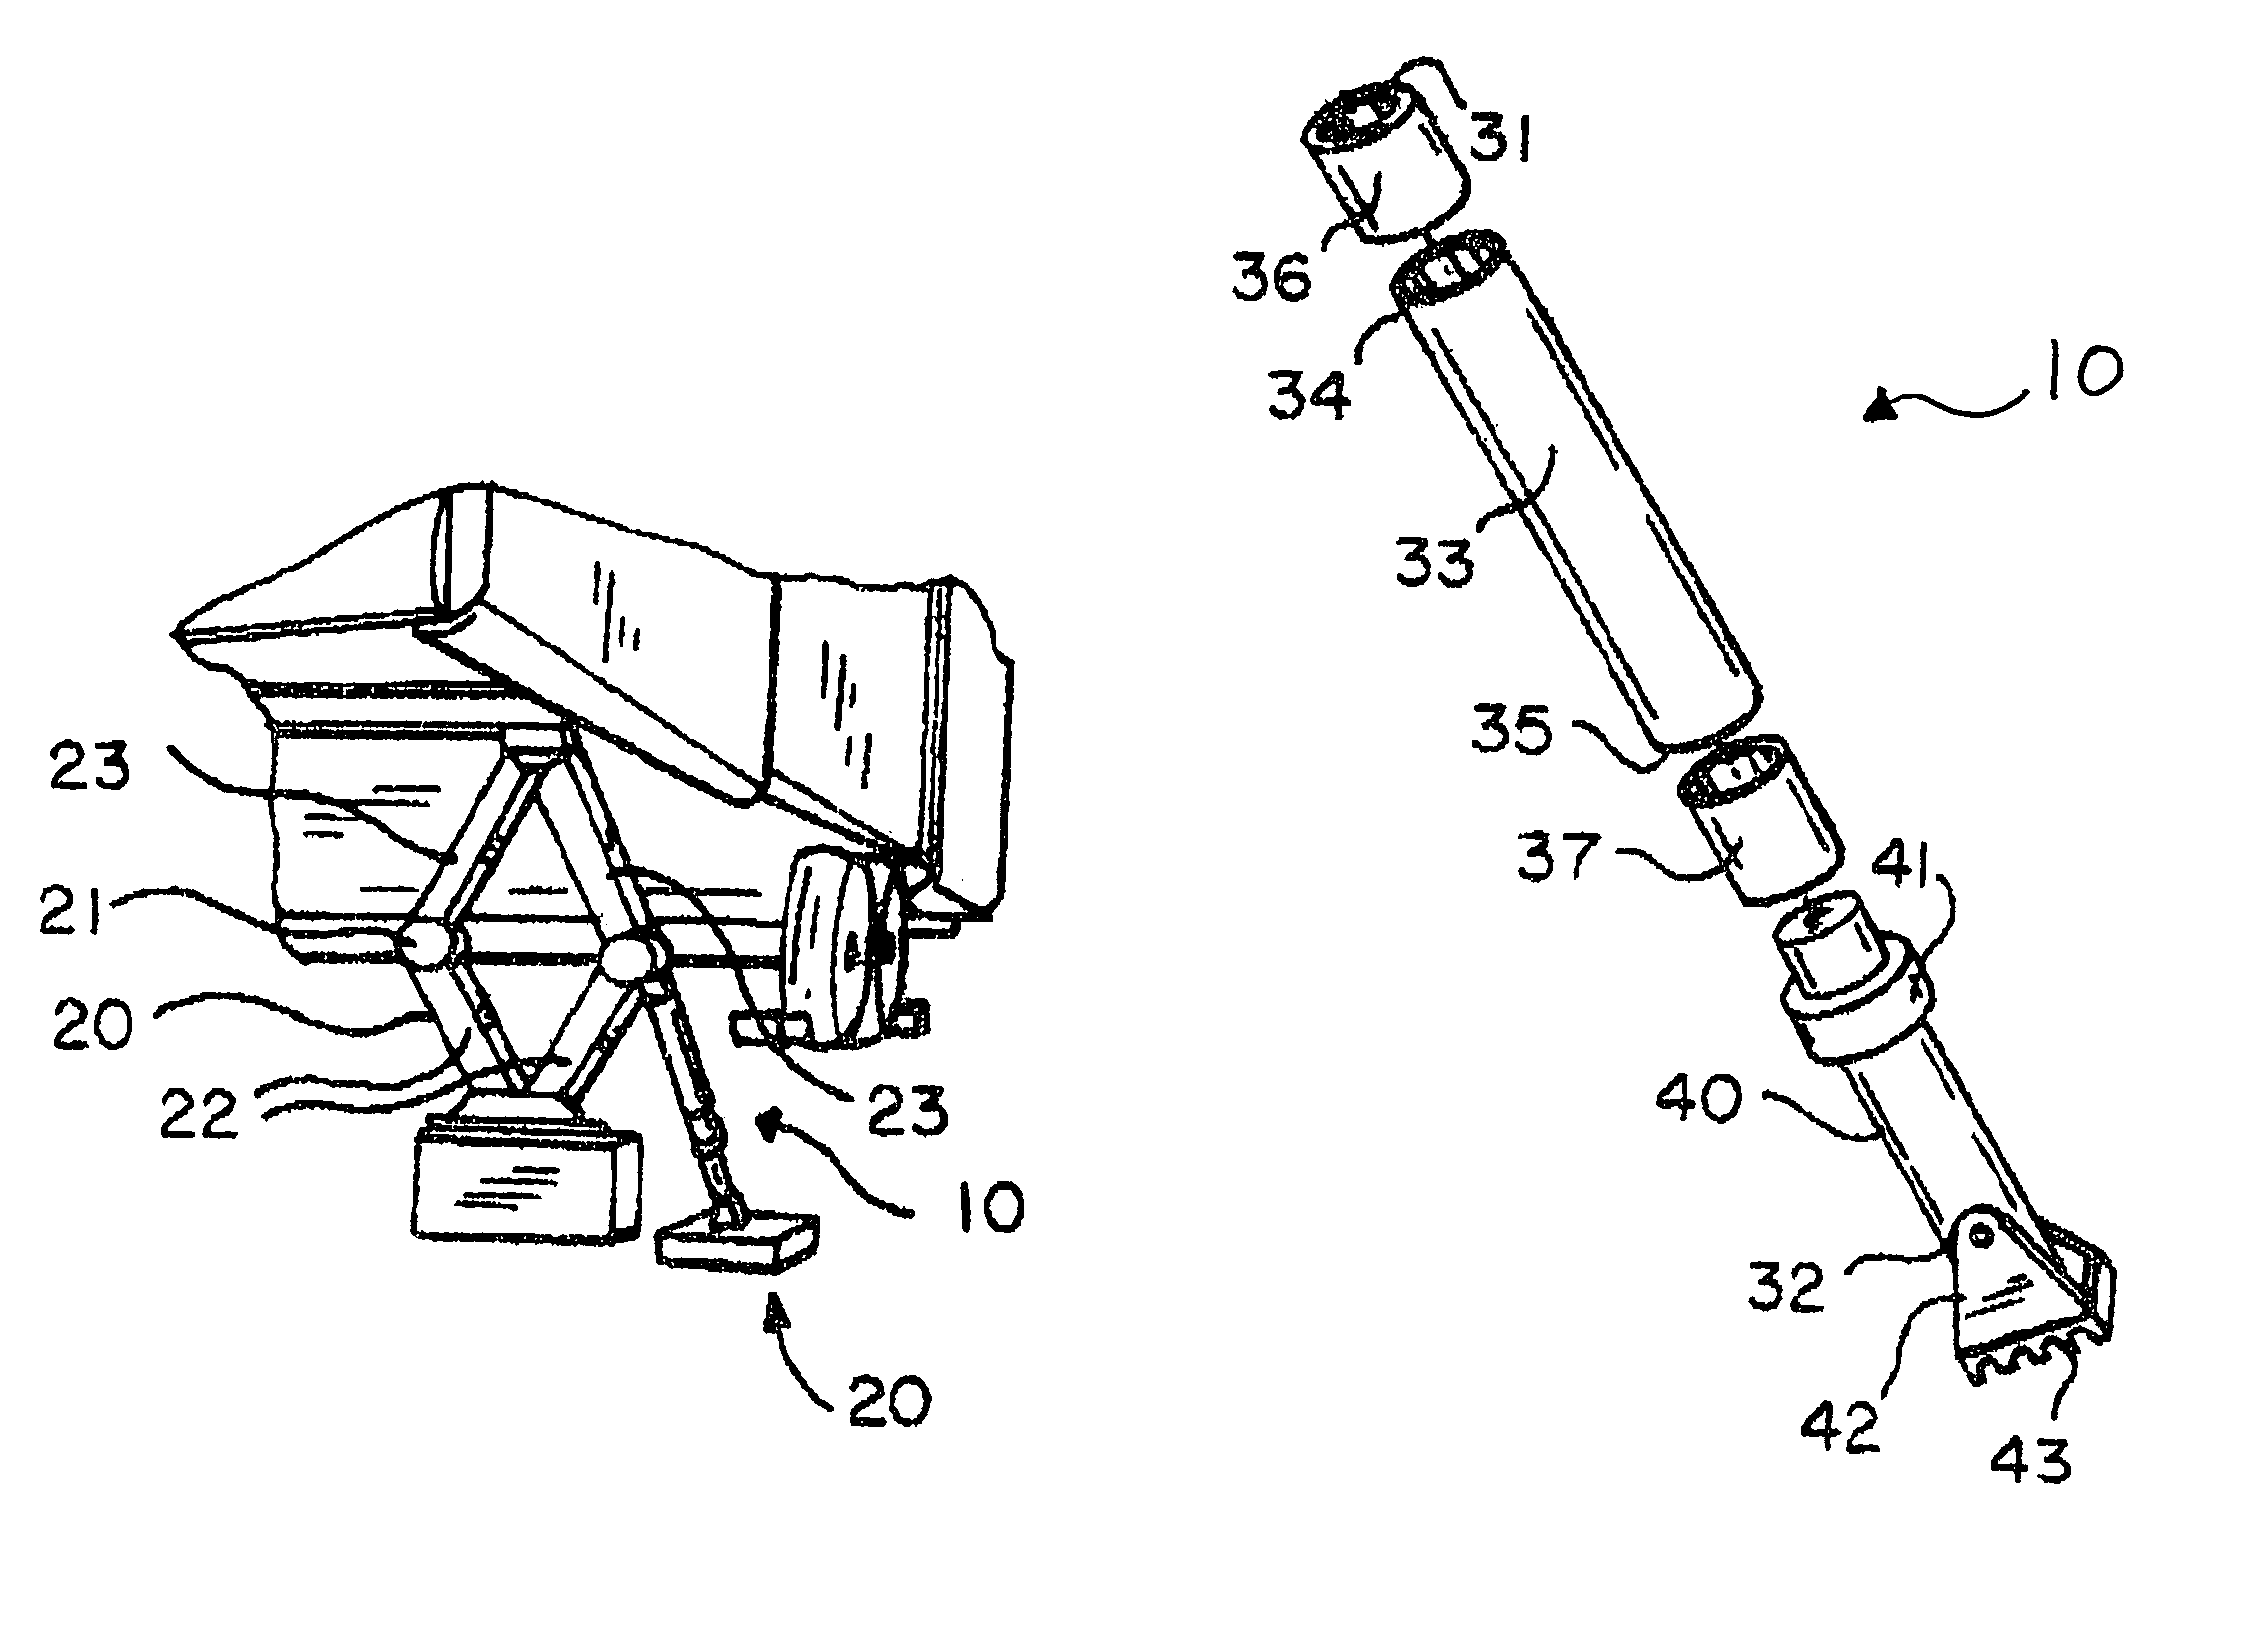 Support rod for stabilizing an existing scissor jack